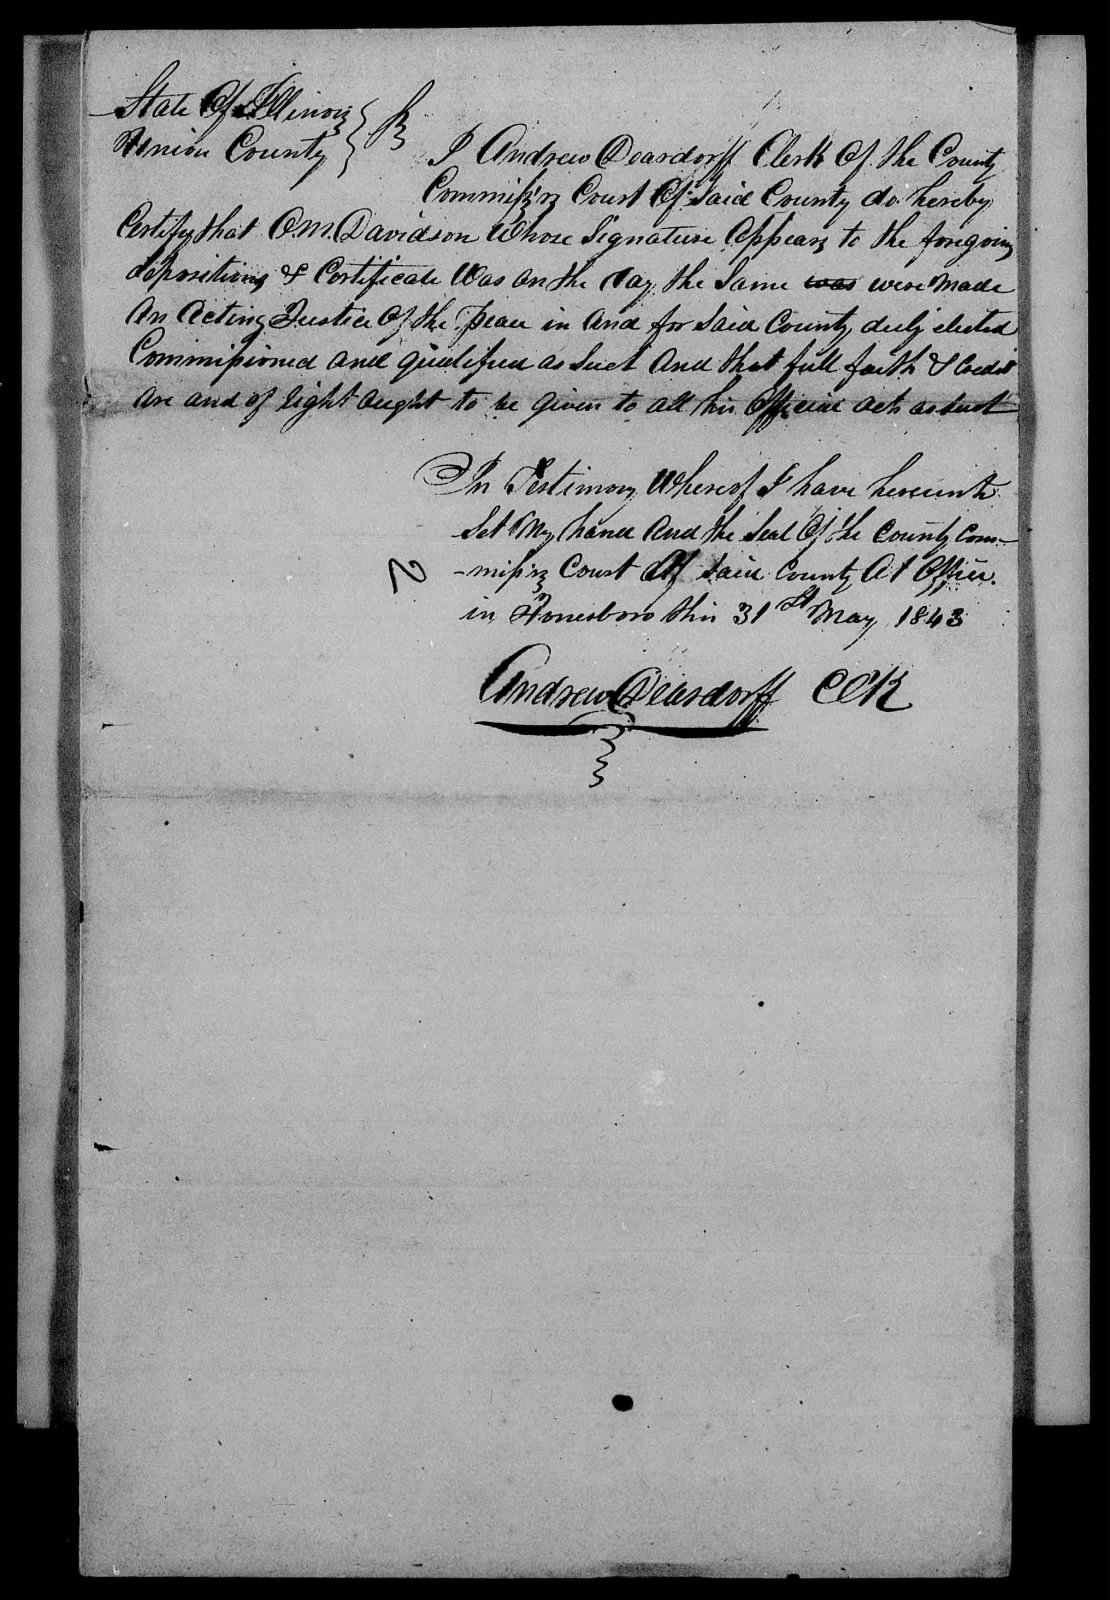 Affidavit of Rosana Murray in support of her Pension Claim, 29 May 1843, page 2